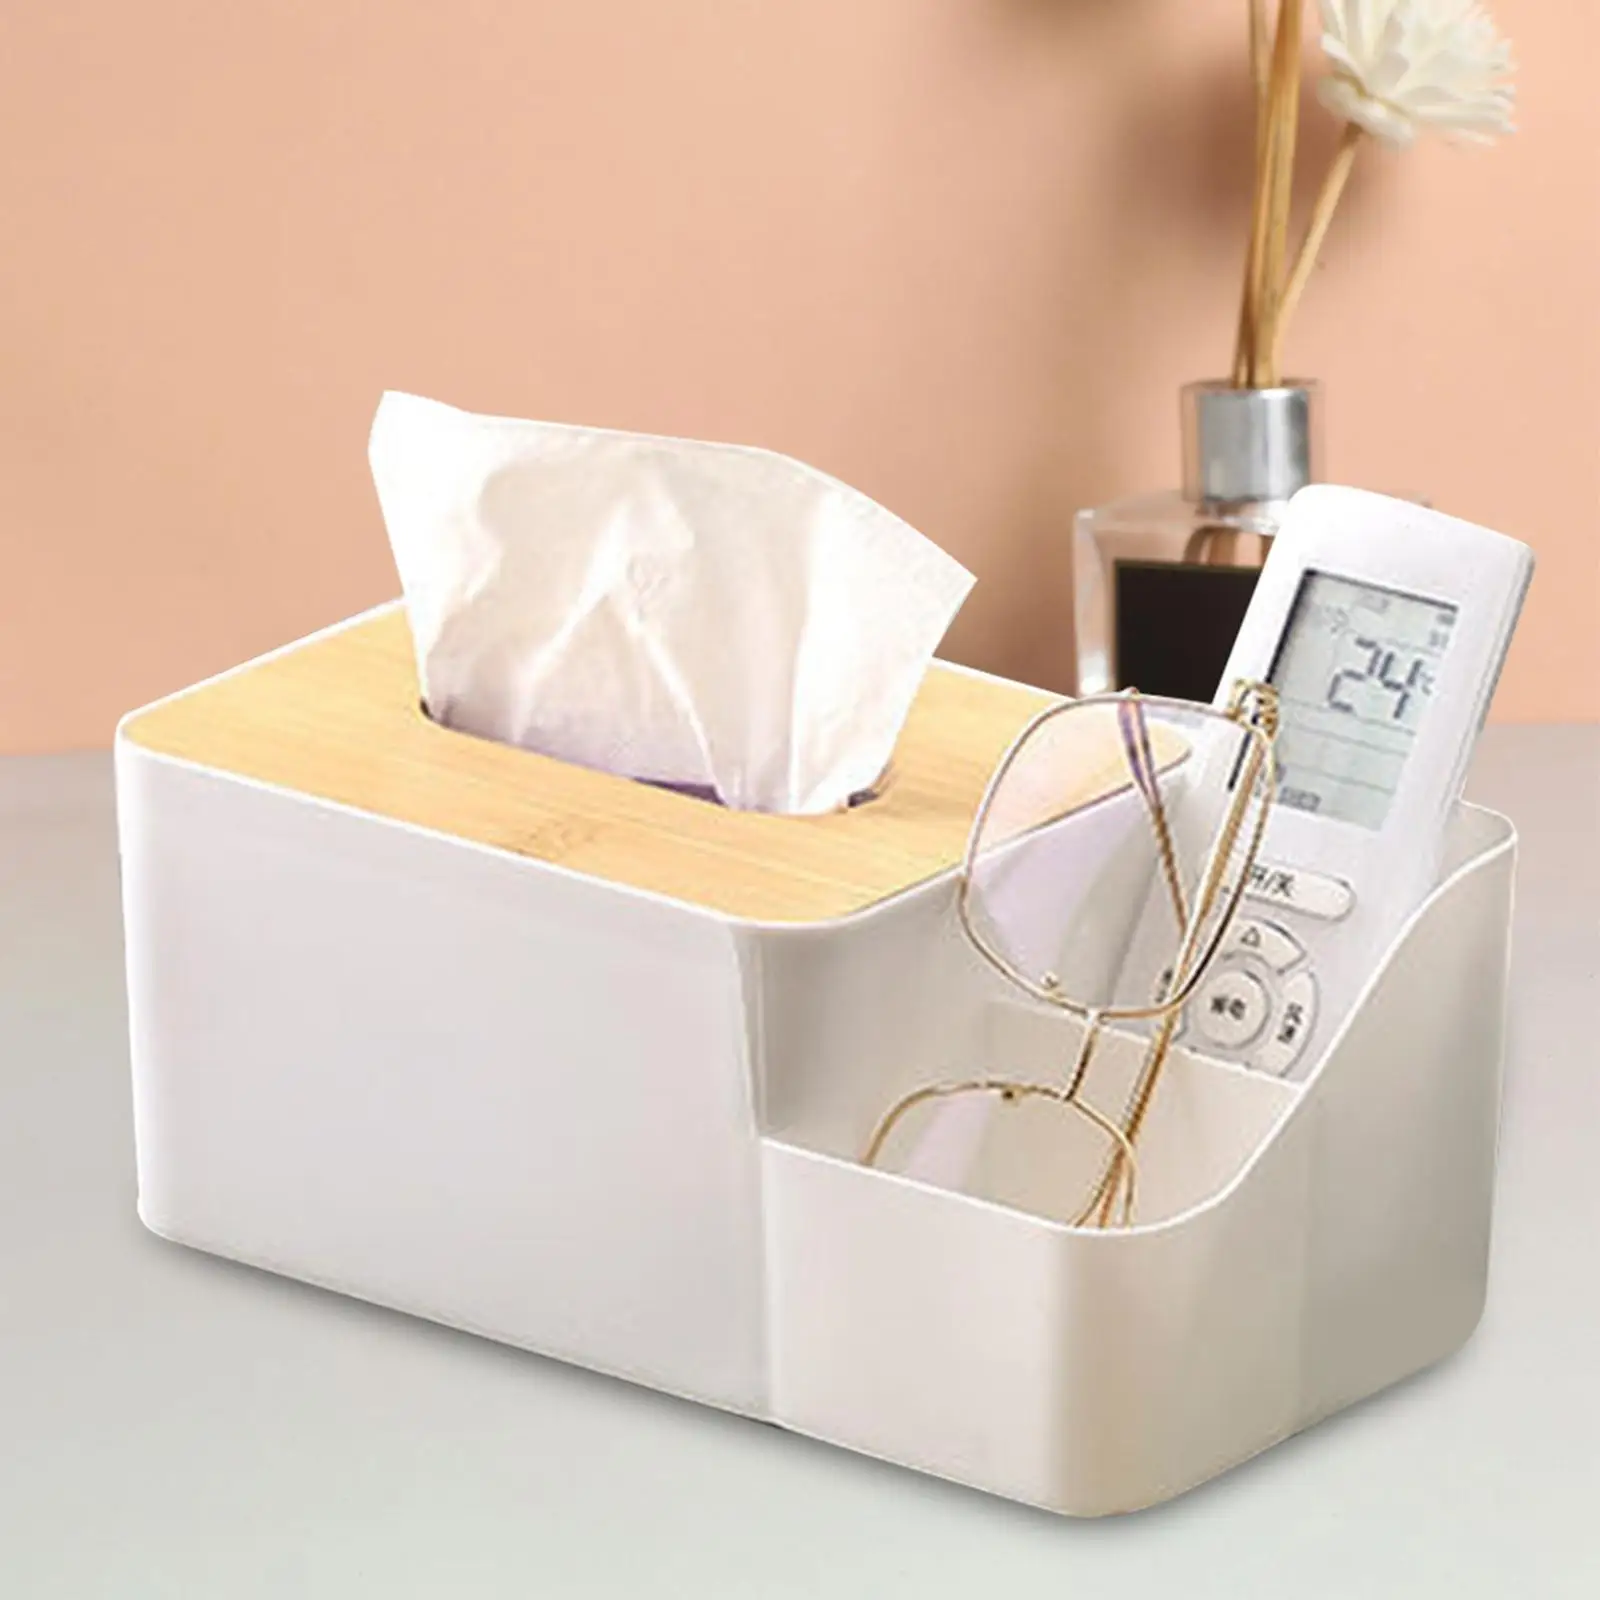 Waterproof Tissue Holder Dustproof Decoration Napkin Paper Storage Facial Tissues Container Organizer for Bedside Table Bedroom